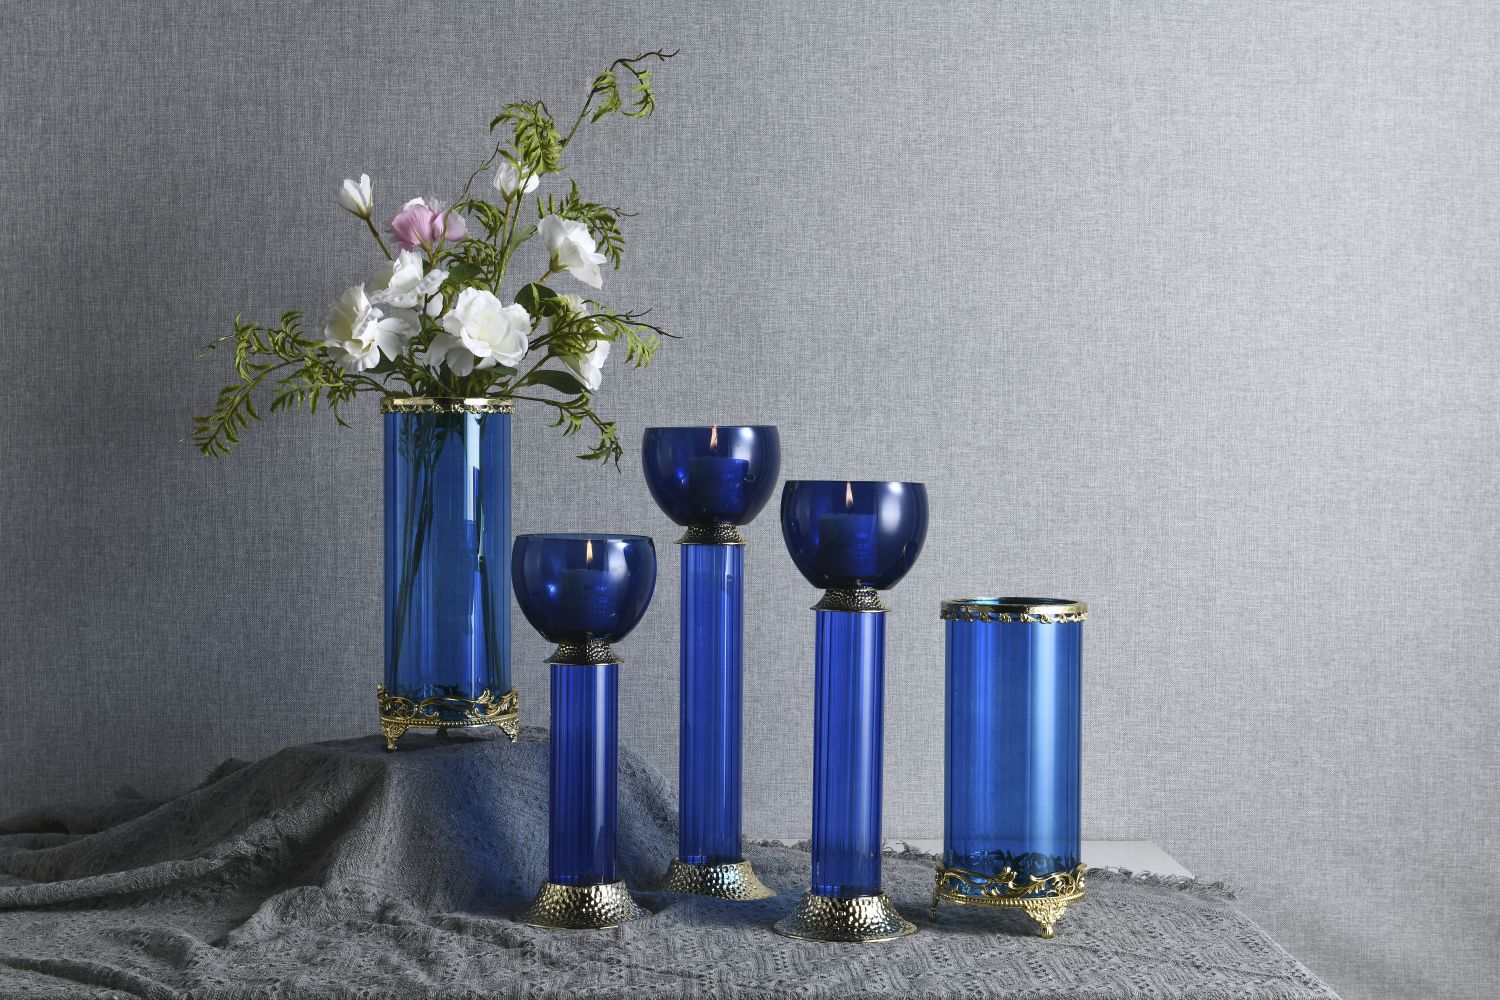 Romance and Elegance of Blue Glass Vases